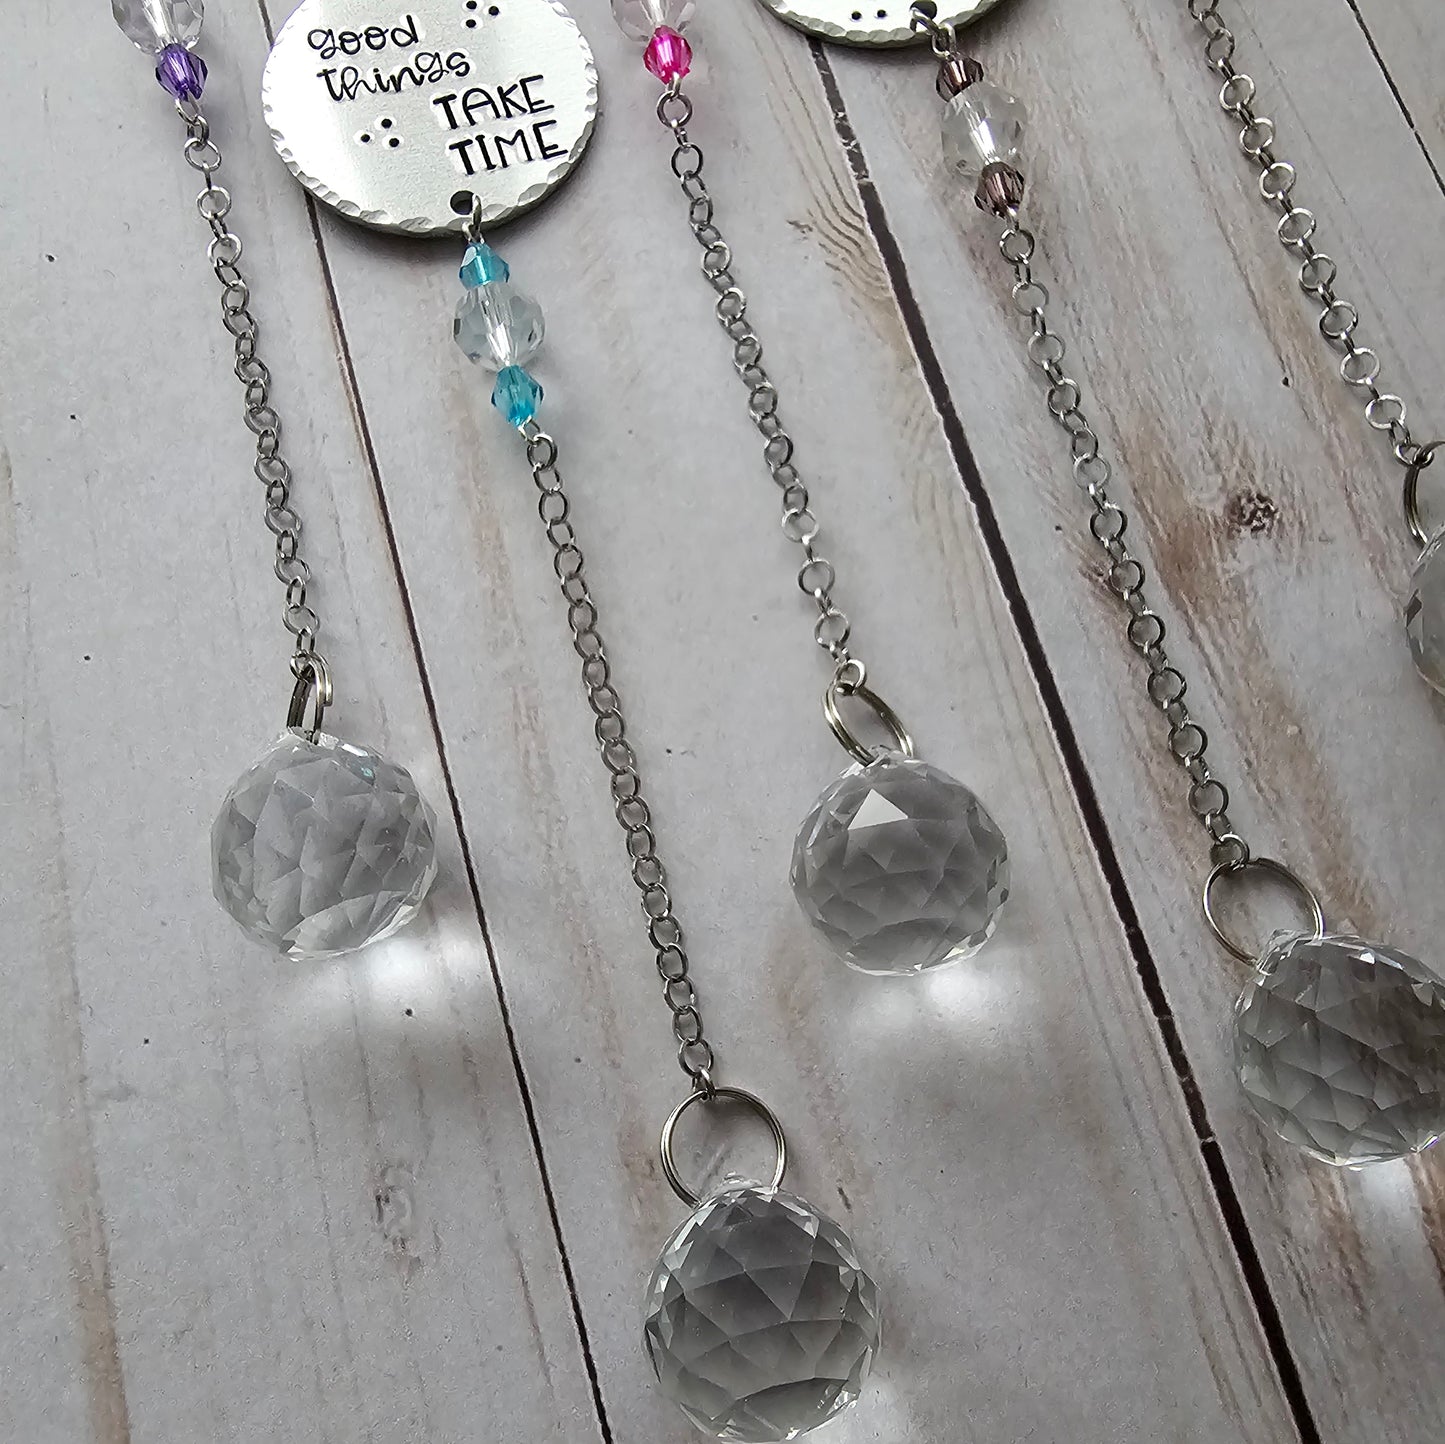 Crystal Suncatcher with Hand Stamped Charm, Cute Bedroom Decor For Teen Girls, Know your Worth, You Can Do Hard Things